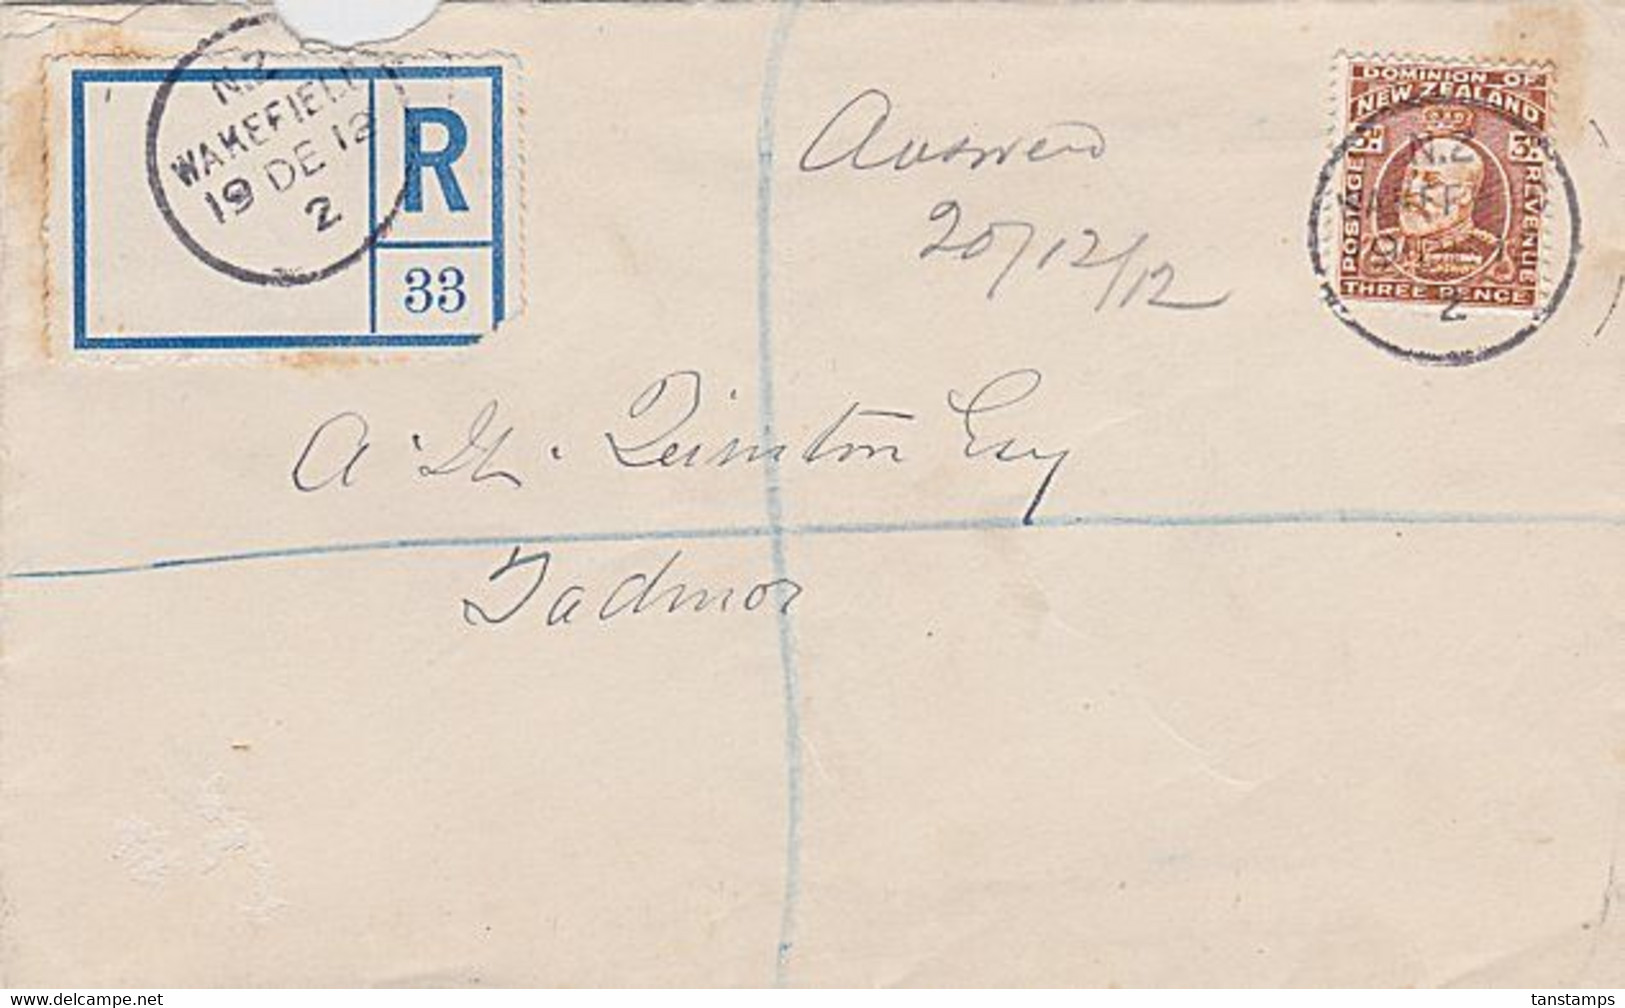 NEW ZEALAND 1912 REGISTERED COVER 3d KEVII SOLO FRANKING WAKEFIELD A-CLASS CDS - Cartas & Documentos